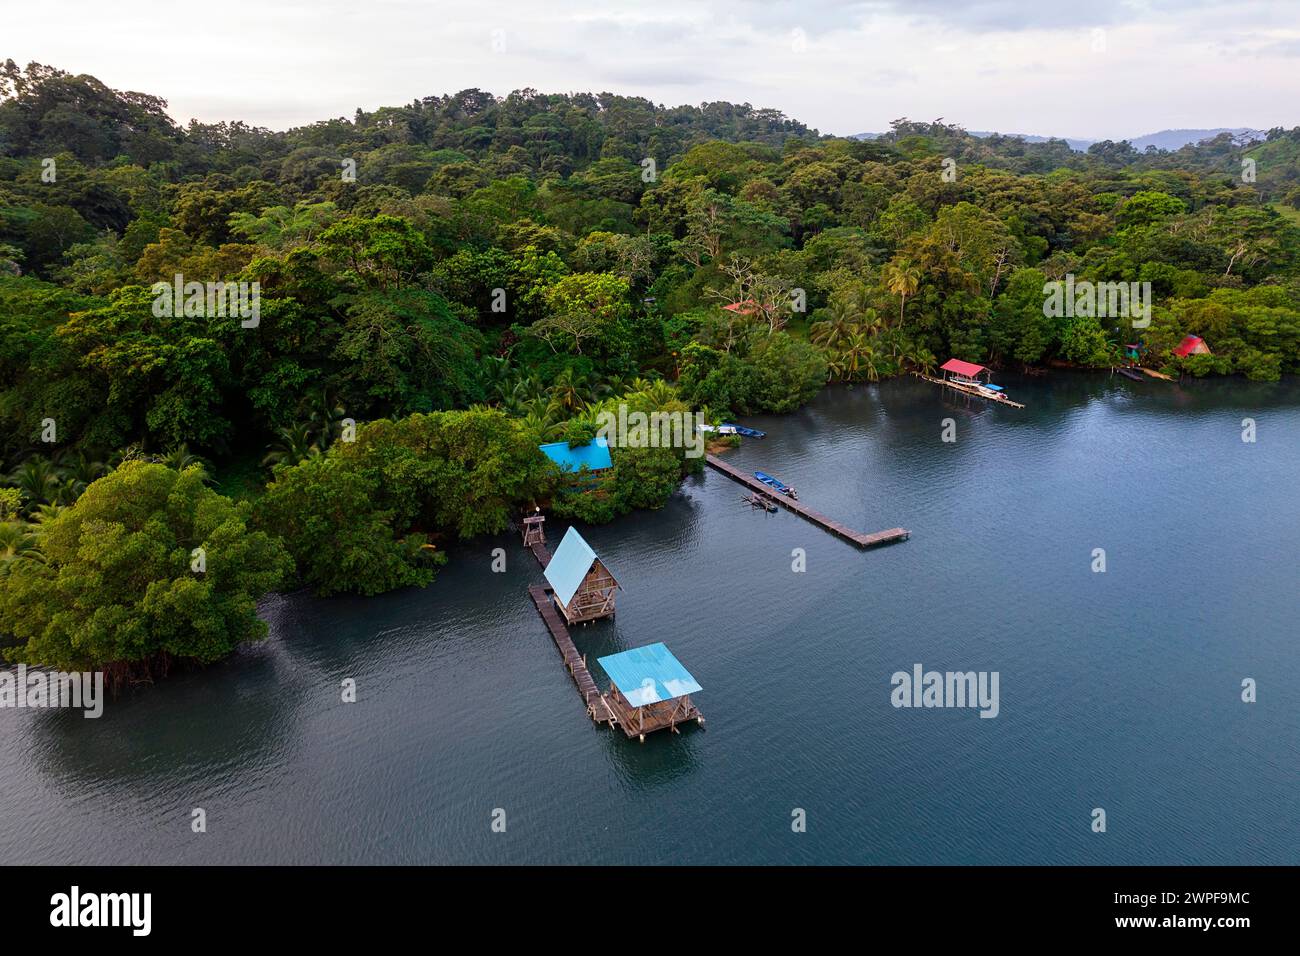 Aerial view of a beautiful tourist wooden cabin over the water in Dolphin Bay on the Island Isla San Cristobal, Bocas del toro, Panama Stock Photo